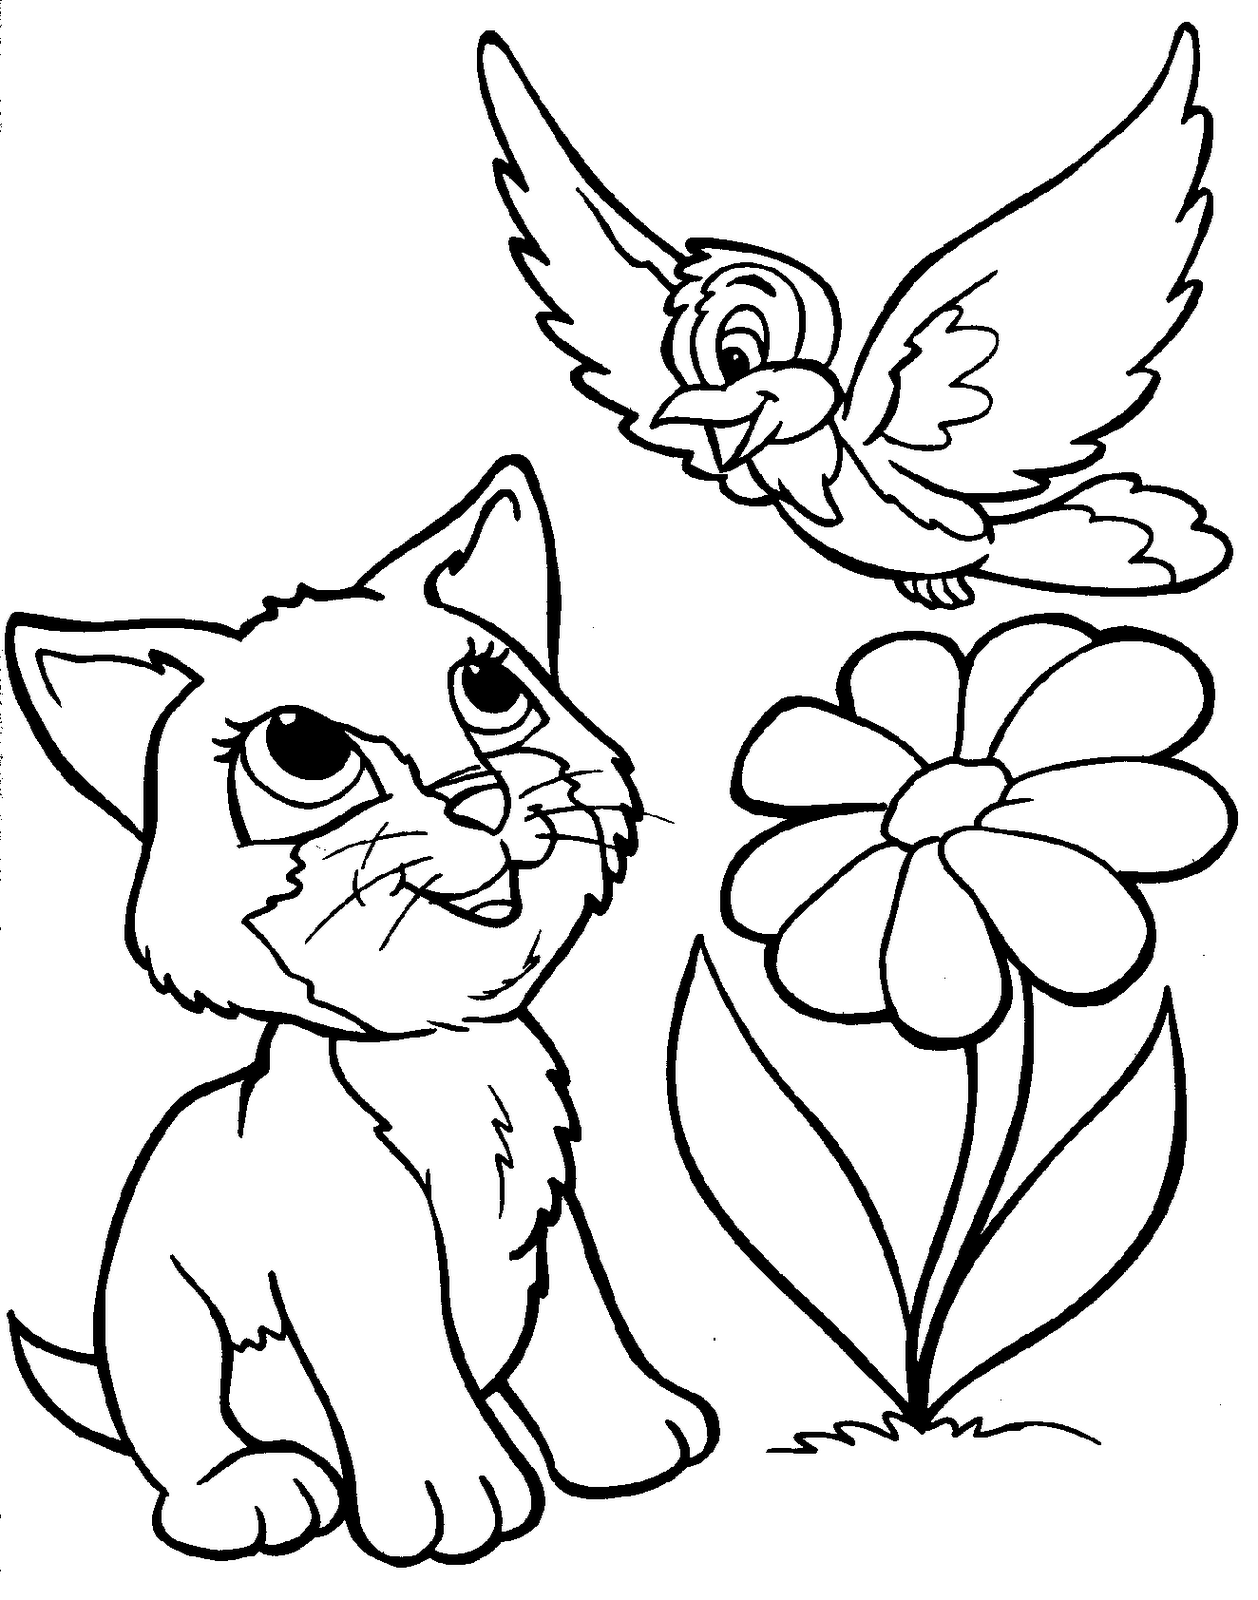 Cute Baby Animal Coloring Pages 18 Image Colorings Coloring Wallpapers Download Free Images Wallpaper [coloring654.blogspot.com]